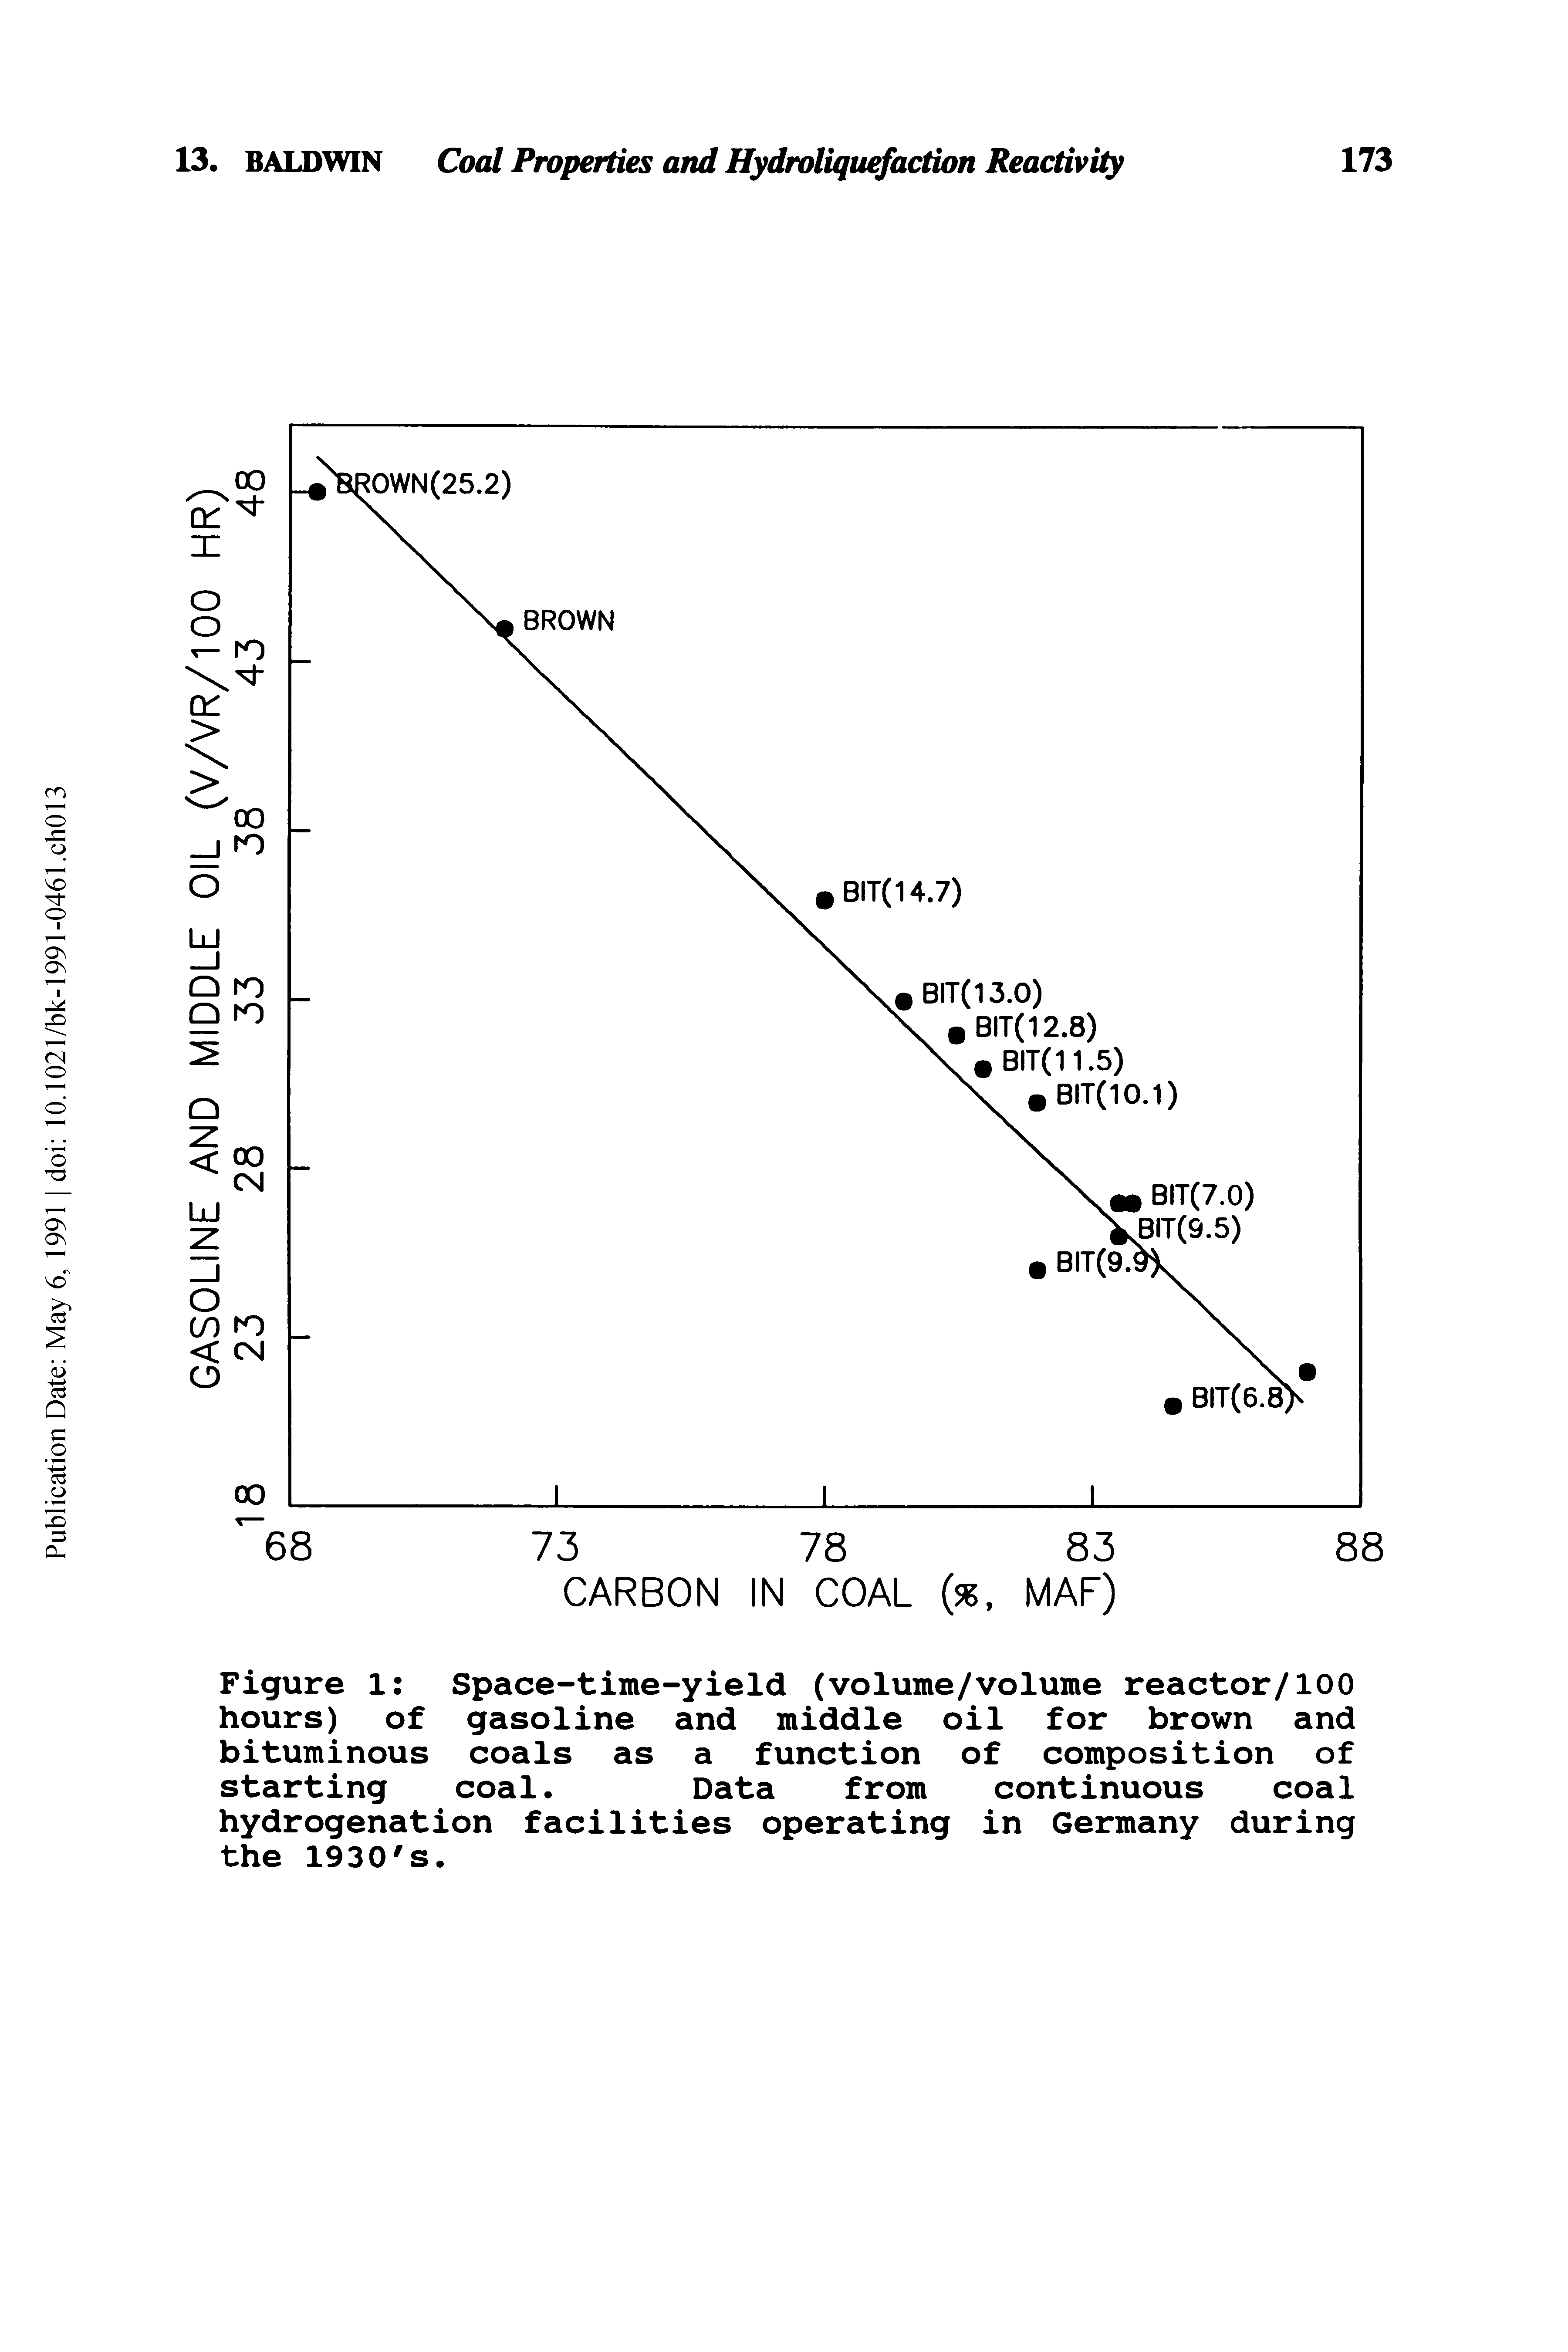 Figure 1 Space-time-yield (volume/volume reactor/100 hours) of gasoline and middle oil for brown and bituminous coals as a function of composition of starting coal. Data from continuous coal hydrogenation facilities operating in Germany during the 1930 s.